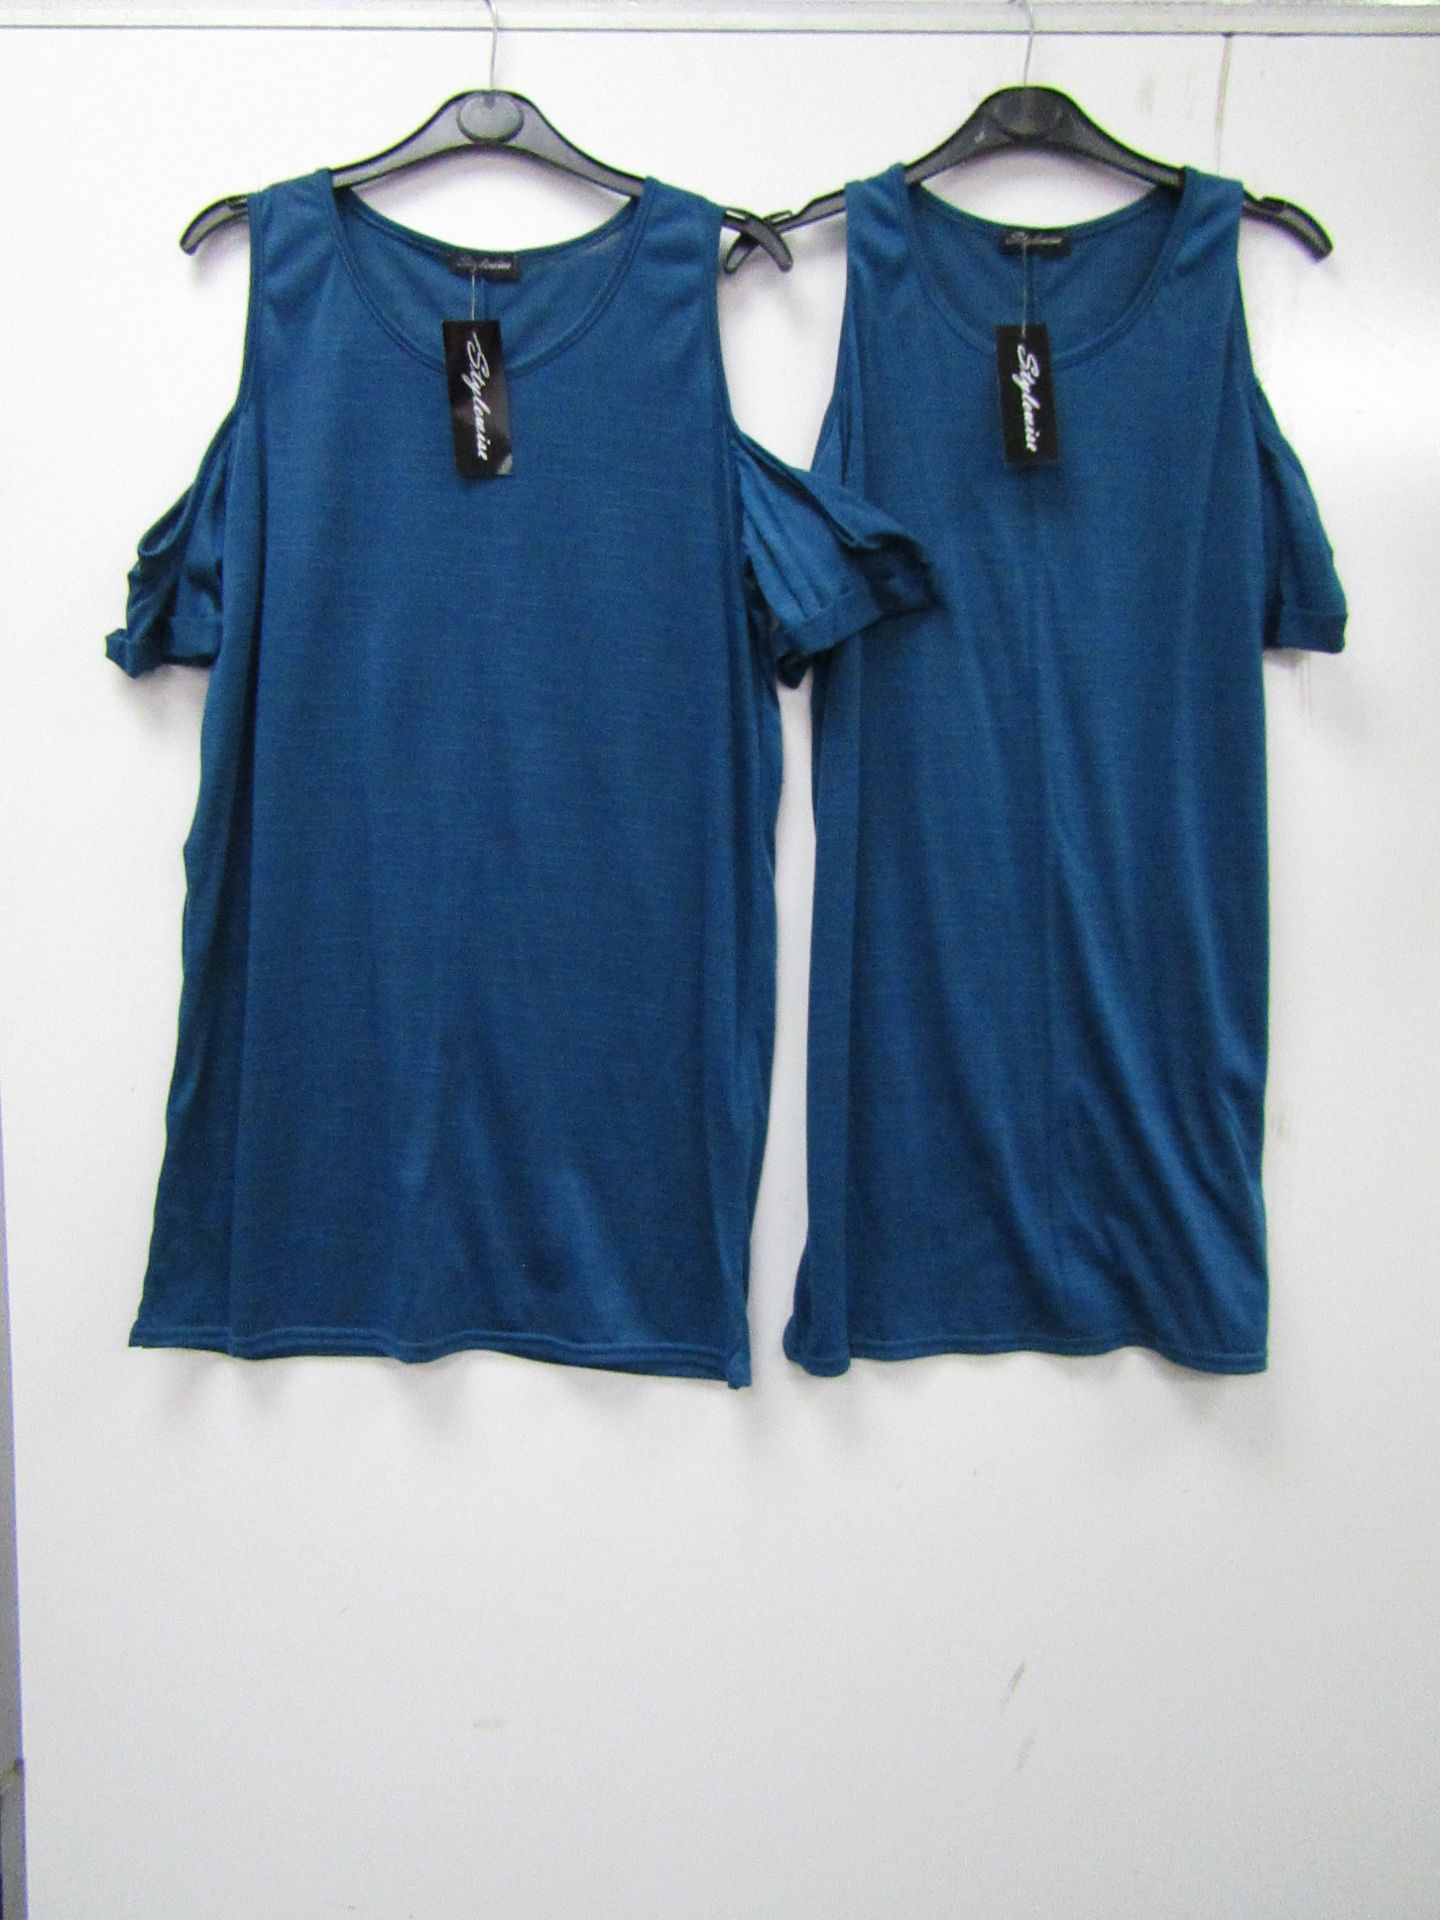 2 x Glamour Babe Cold Shoulder Dresses sizes S/M & M/L new with tags